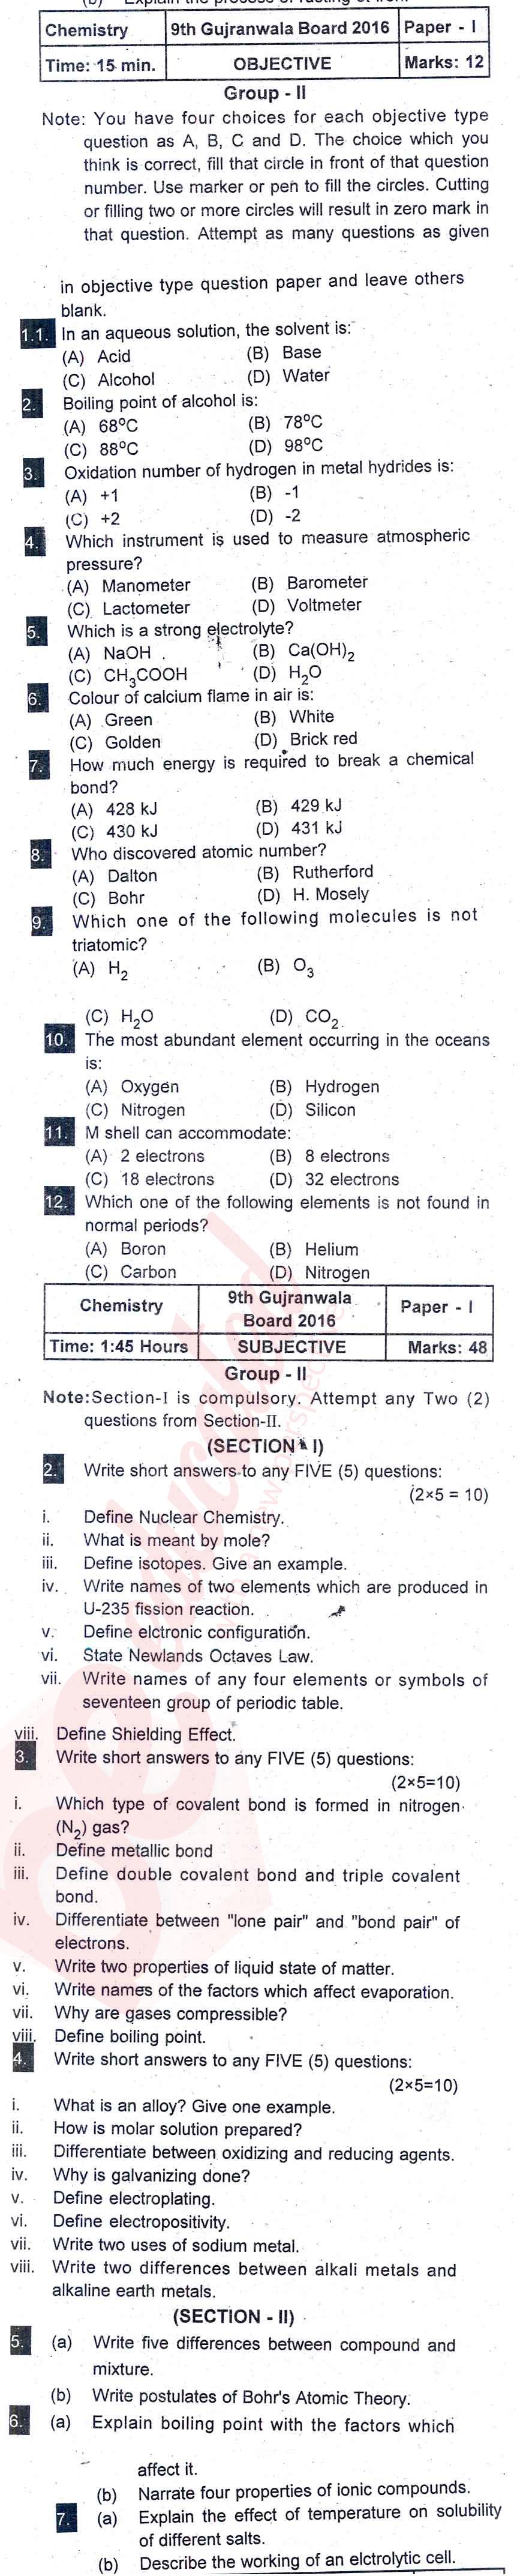 Chemistry 9th English Medium Past Paper Group 2 BISE Gujranwala 2016